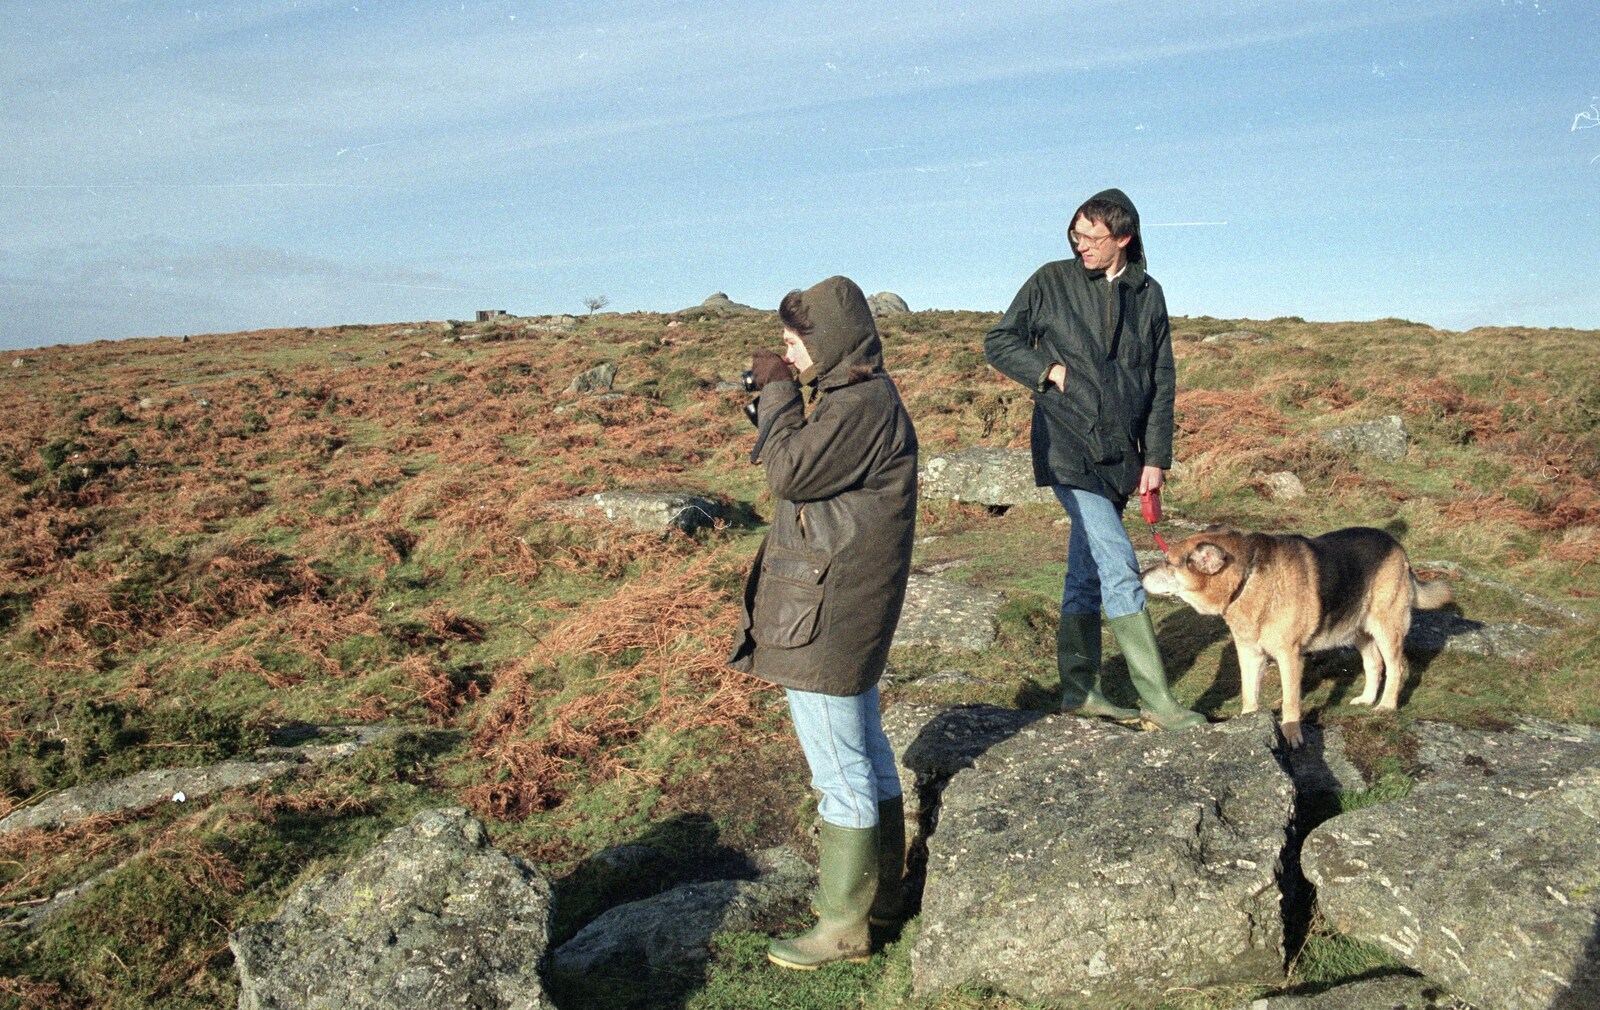 Angela takes a photo on Dartmoor from Totnes Pre-Christmas, Devon - 19th December 1990